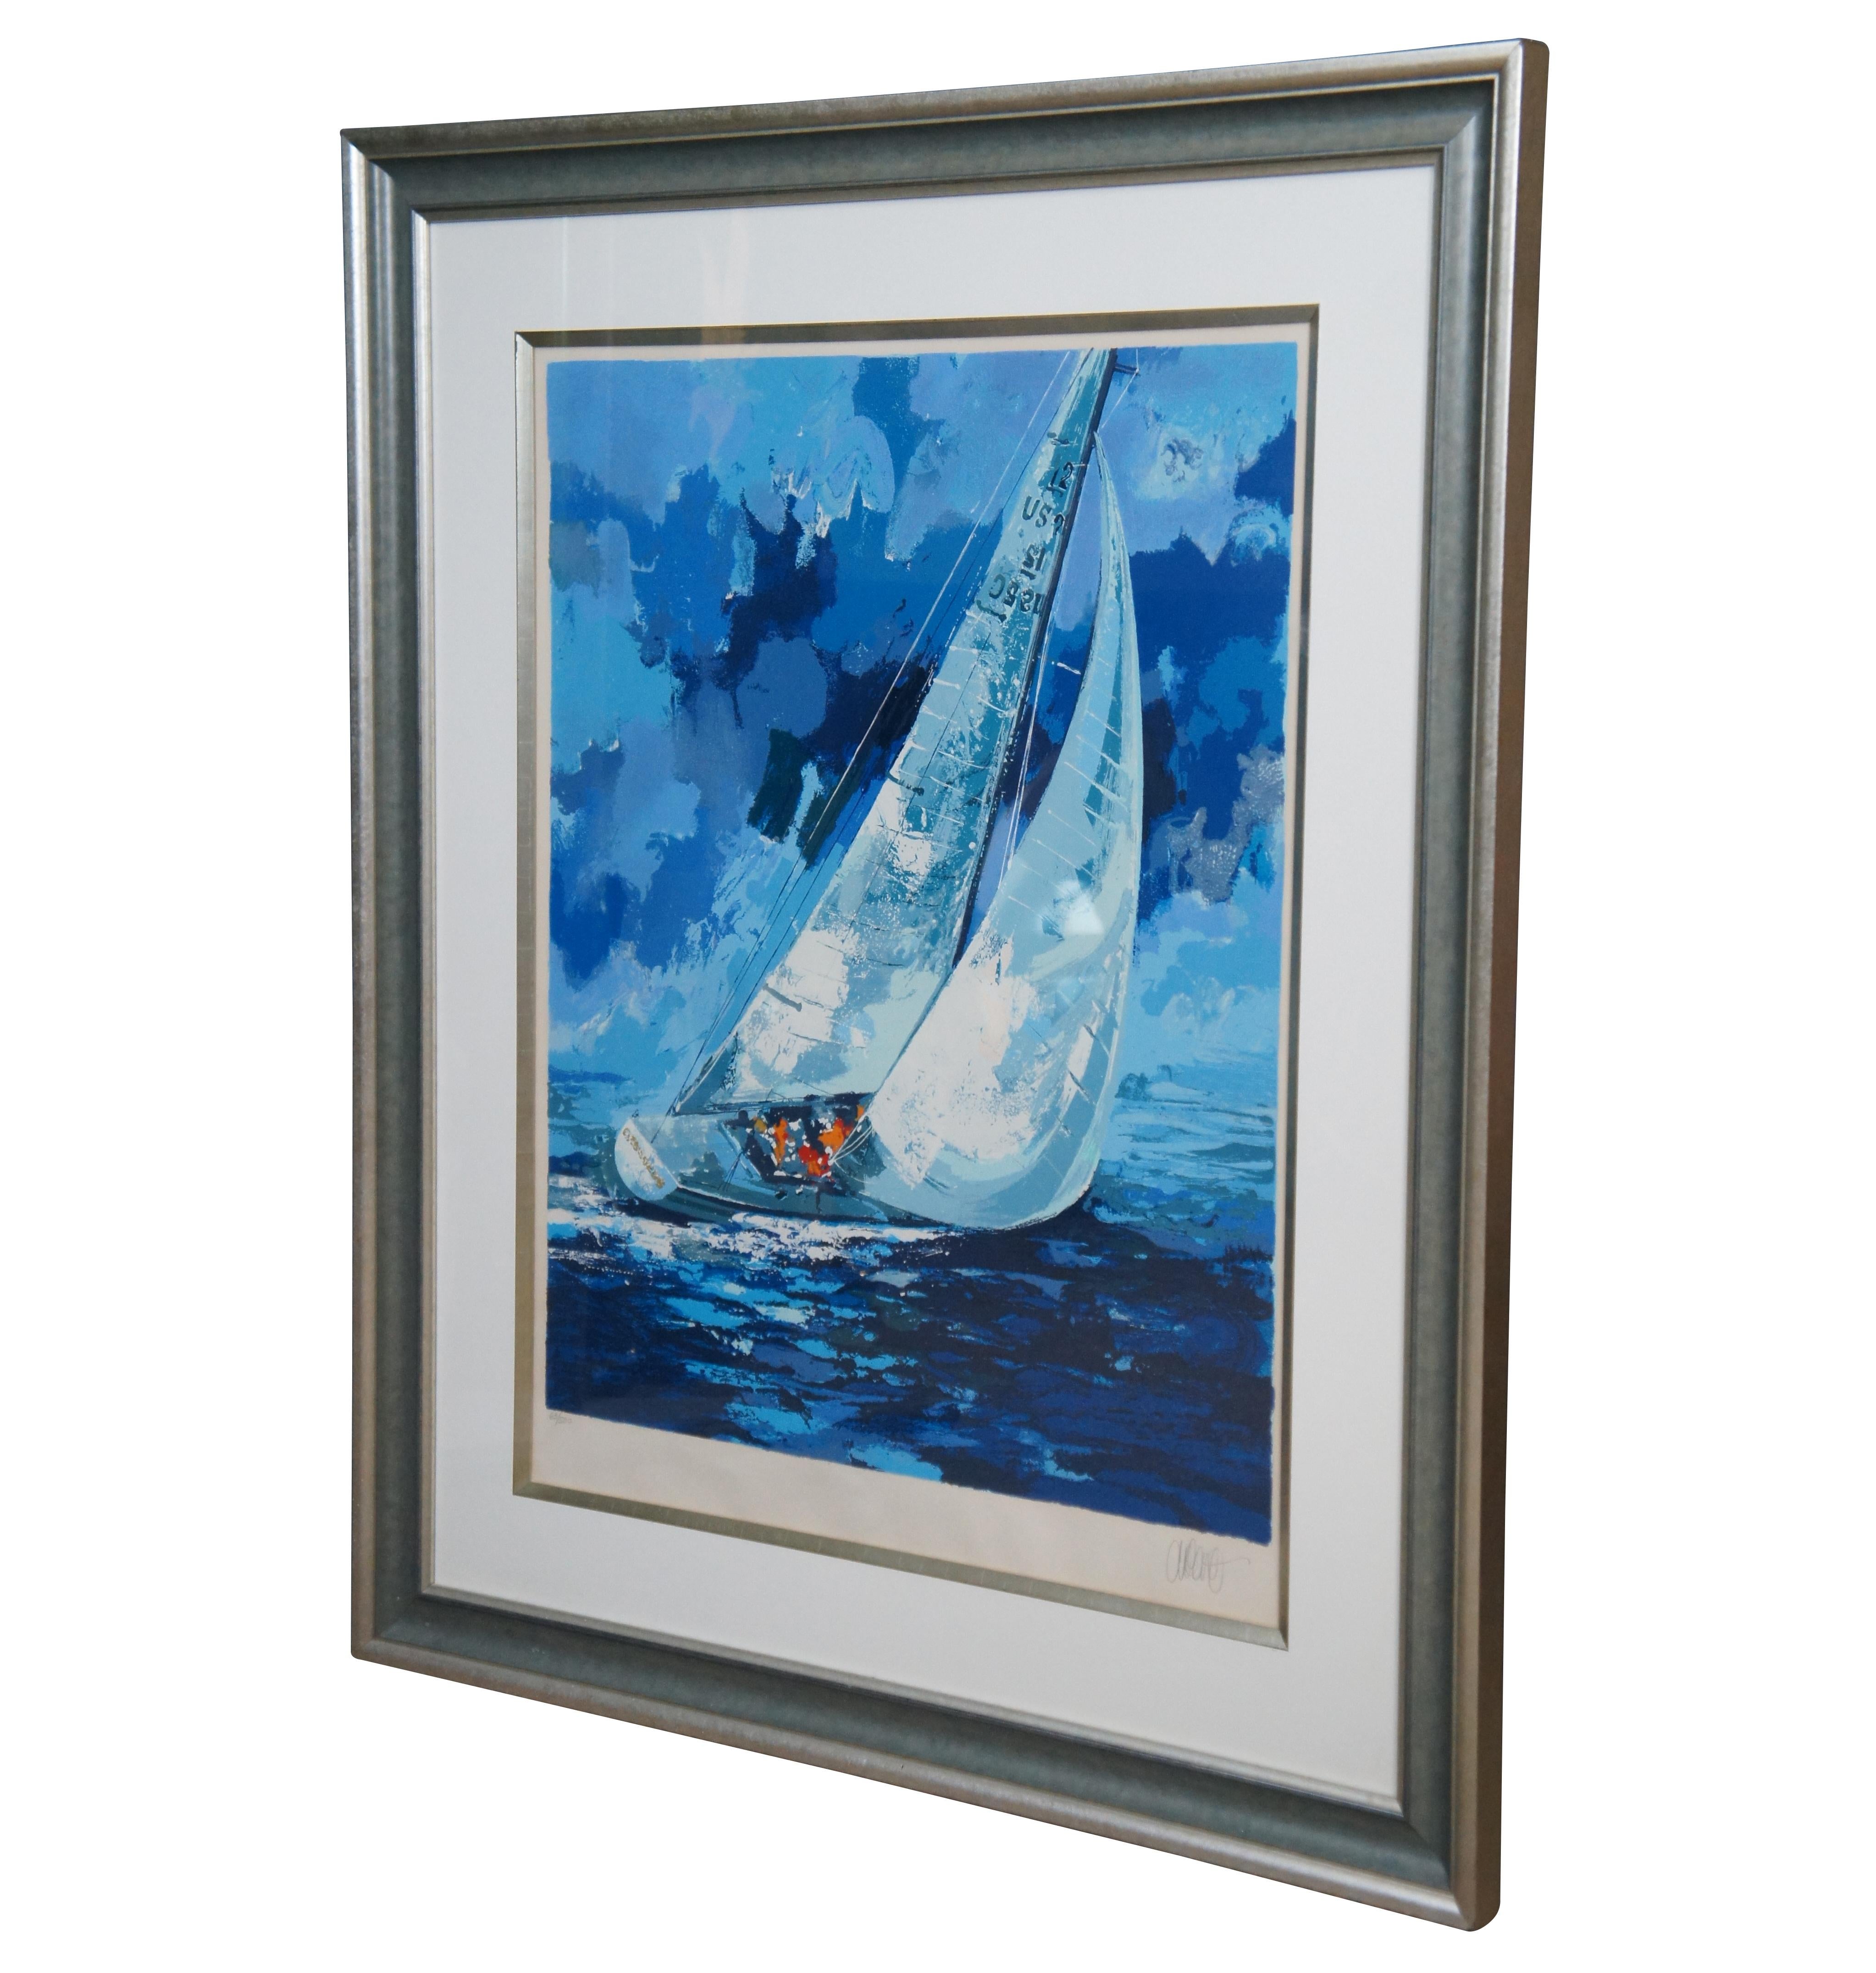 Vintage 1977 limited edition seascape serigraph print of “America’s Champion I” sailboat on blue water, pencil signed and numbered 63/500 by Wayland Moore.

Provenance:
Estate of J. Frederic Gagel, owner of multiple Thoroughbred race horses that